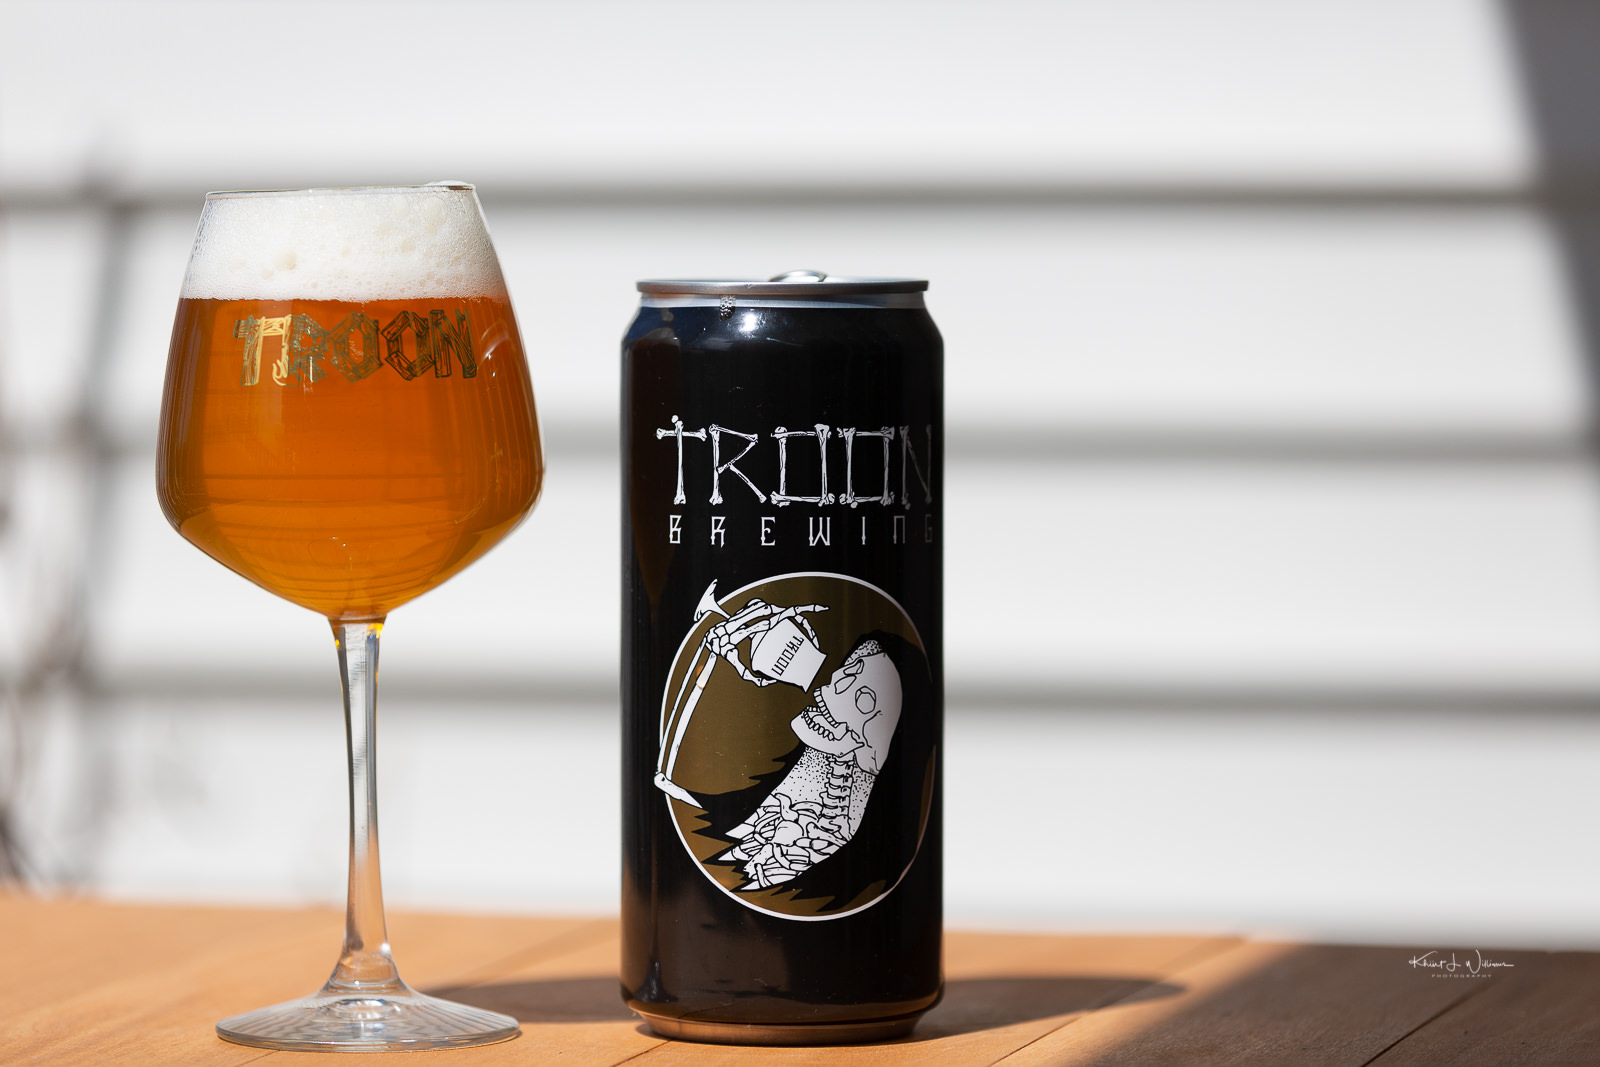 Troon Brewing's Neither Pine nor Apple: Discuss